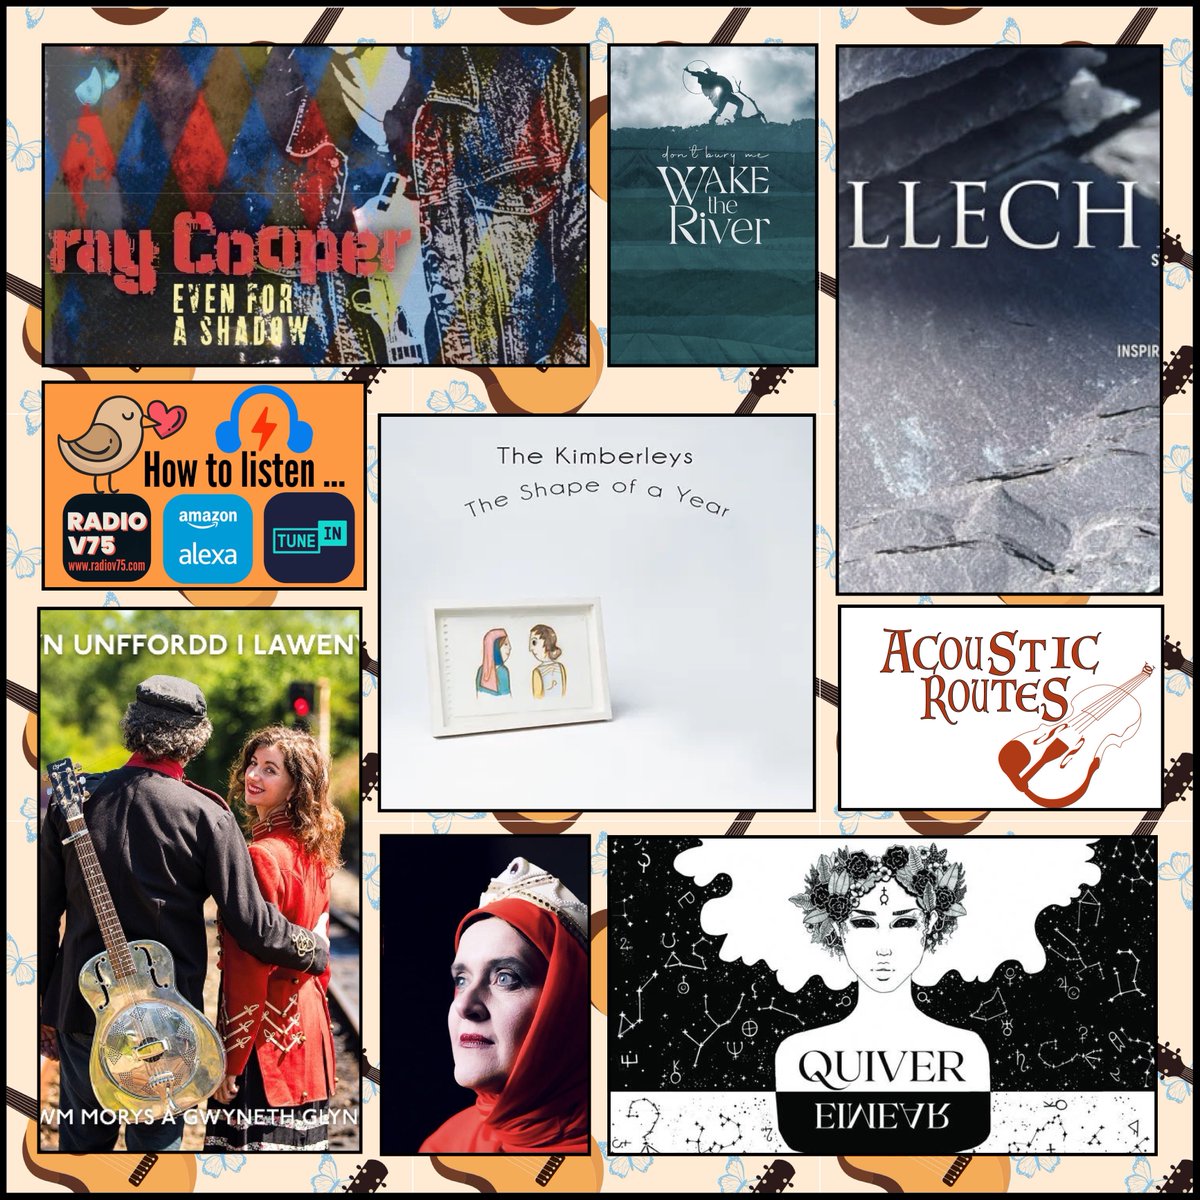 Coming up on @AcousticRoutes show 492, the featured album from @the_kimberleys & music from @twmtrefan a @GwynethGlyn @waketheriver @RaycooperRay @FoxbridgeMusic @StateofUndress @DariaKulesh and @johnacalun Tune in to radiov75.com Weds 7pm 🏴󠁧󠁢󠁷󠁬󠁳󠁿🇬🇧